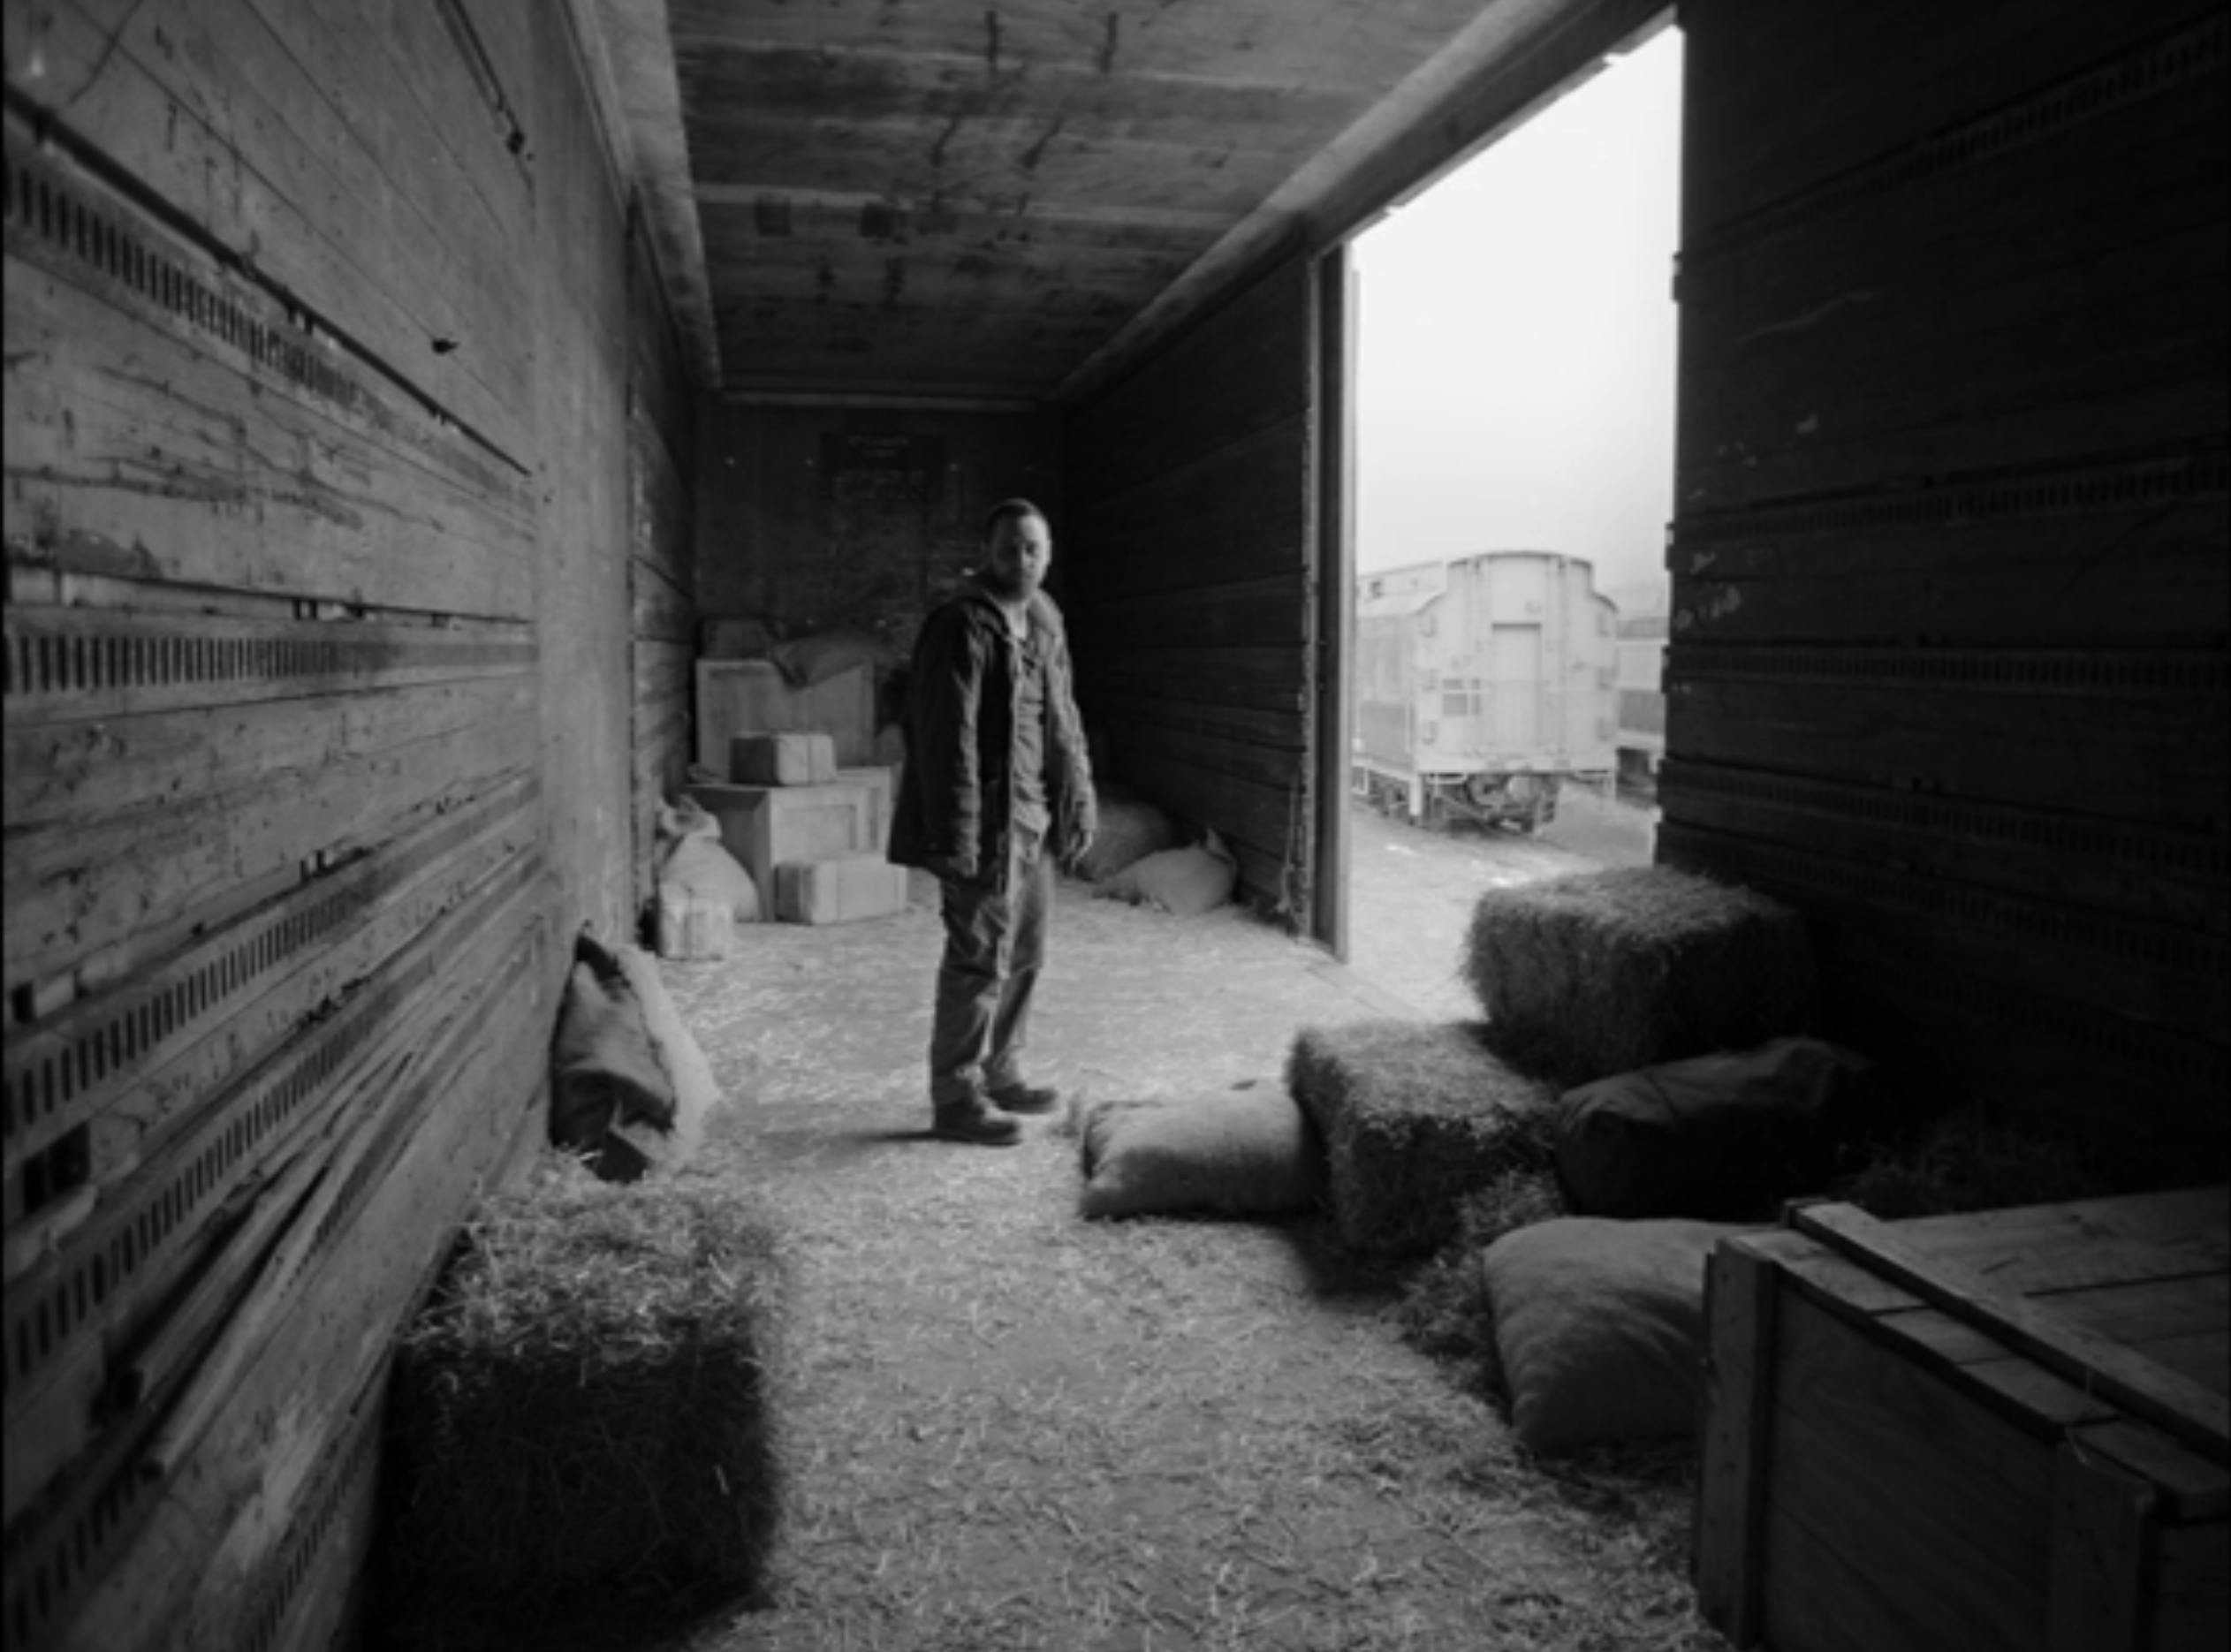 A black and white image of a man in a room with hay stacks and boxes while a railcar is seen outside